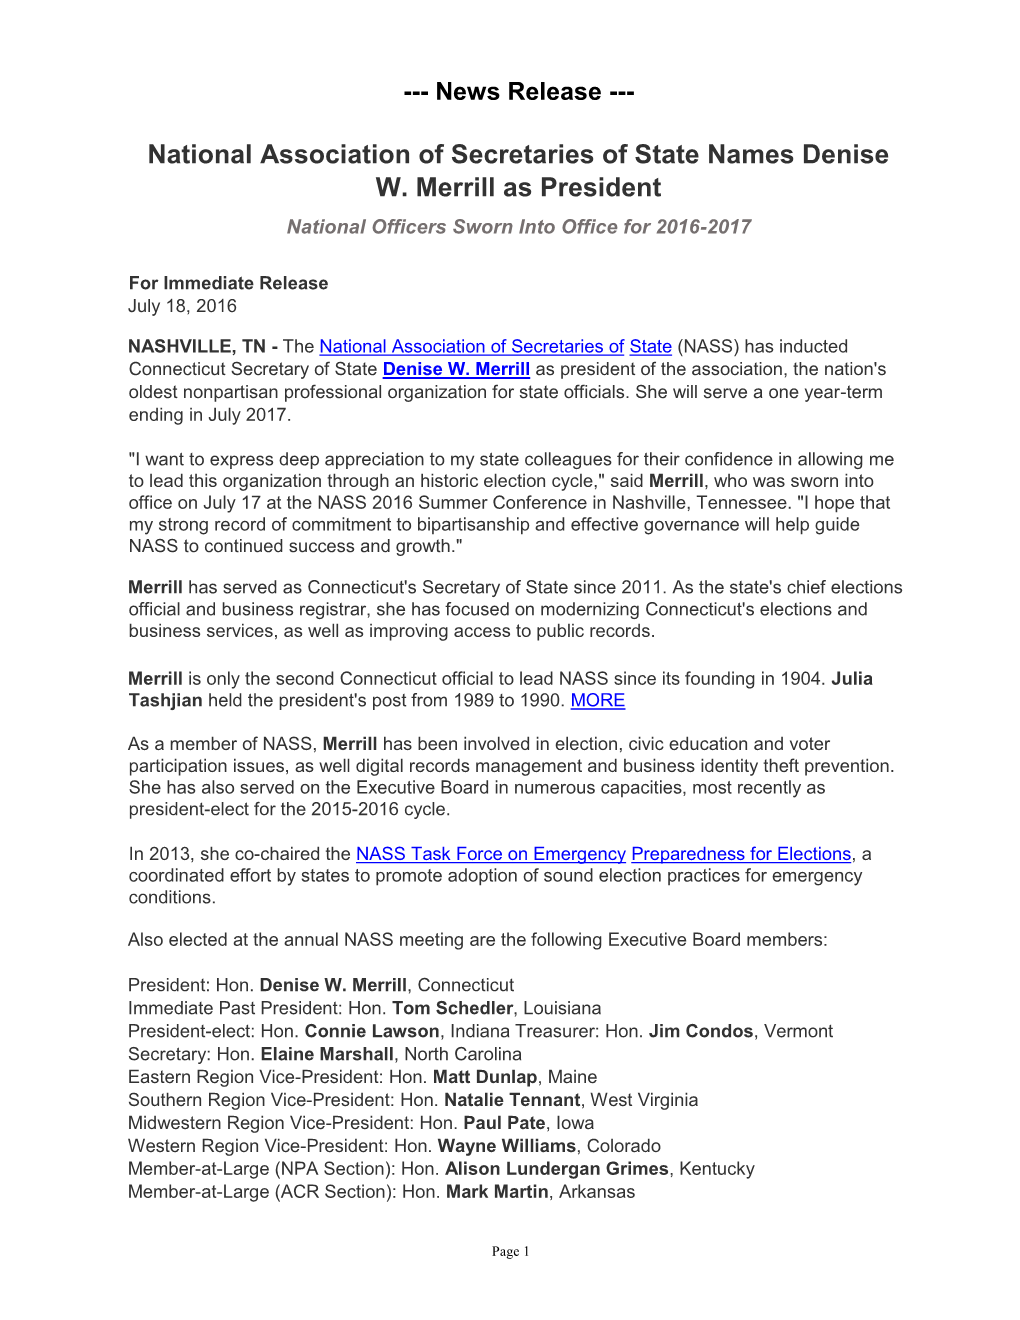 National Association of Secretaries of State Names Denise W